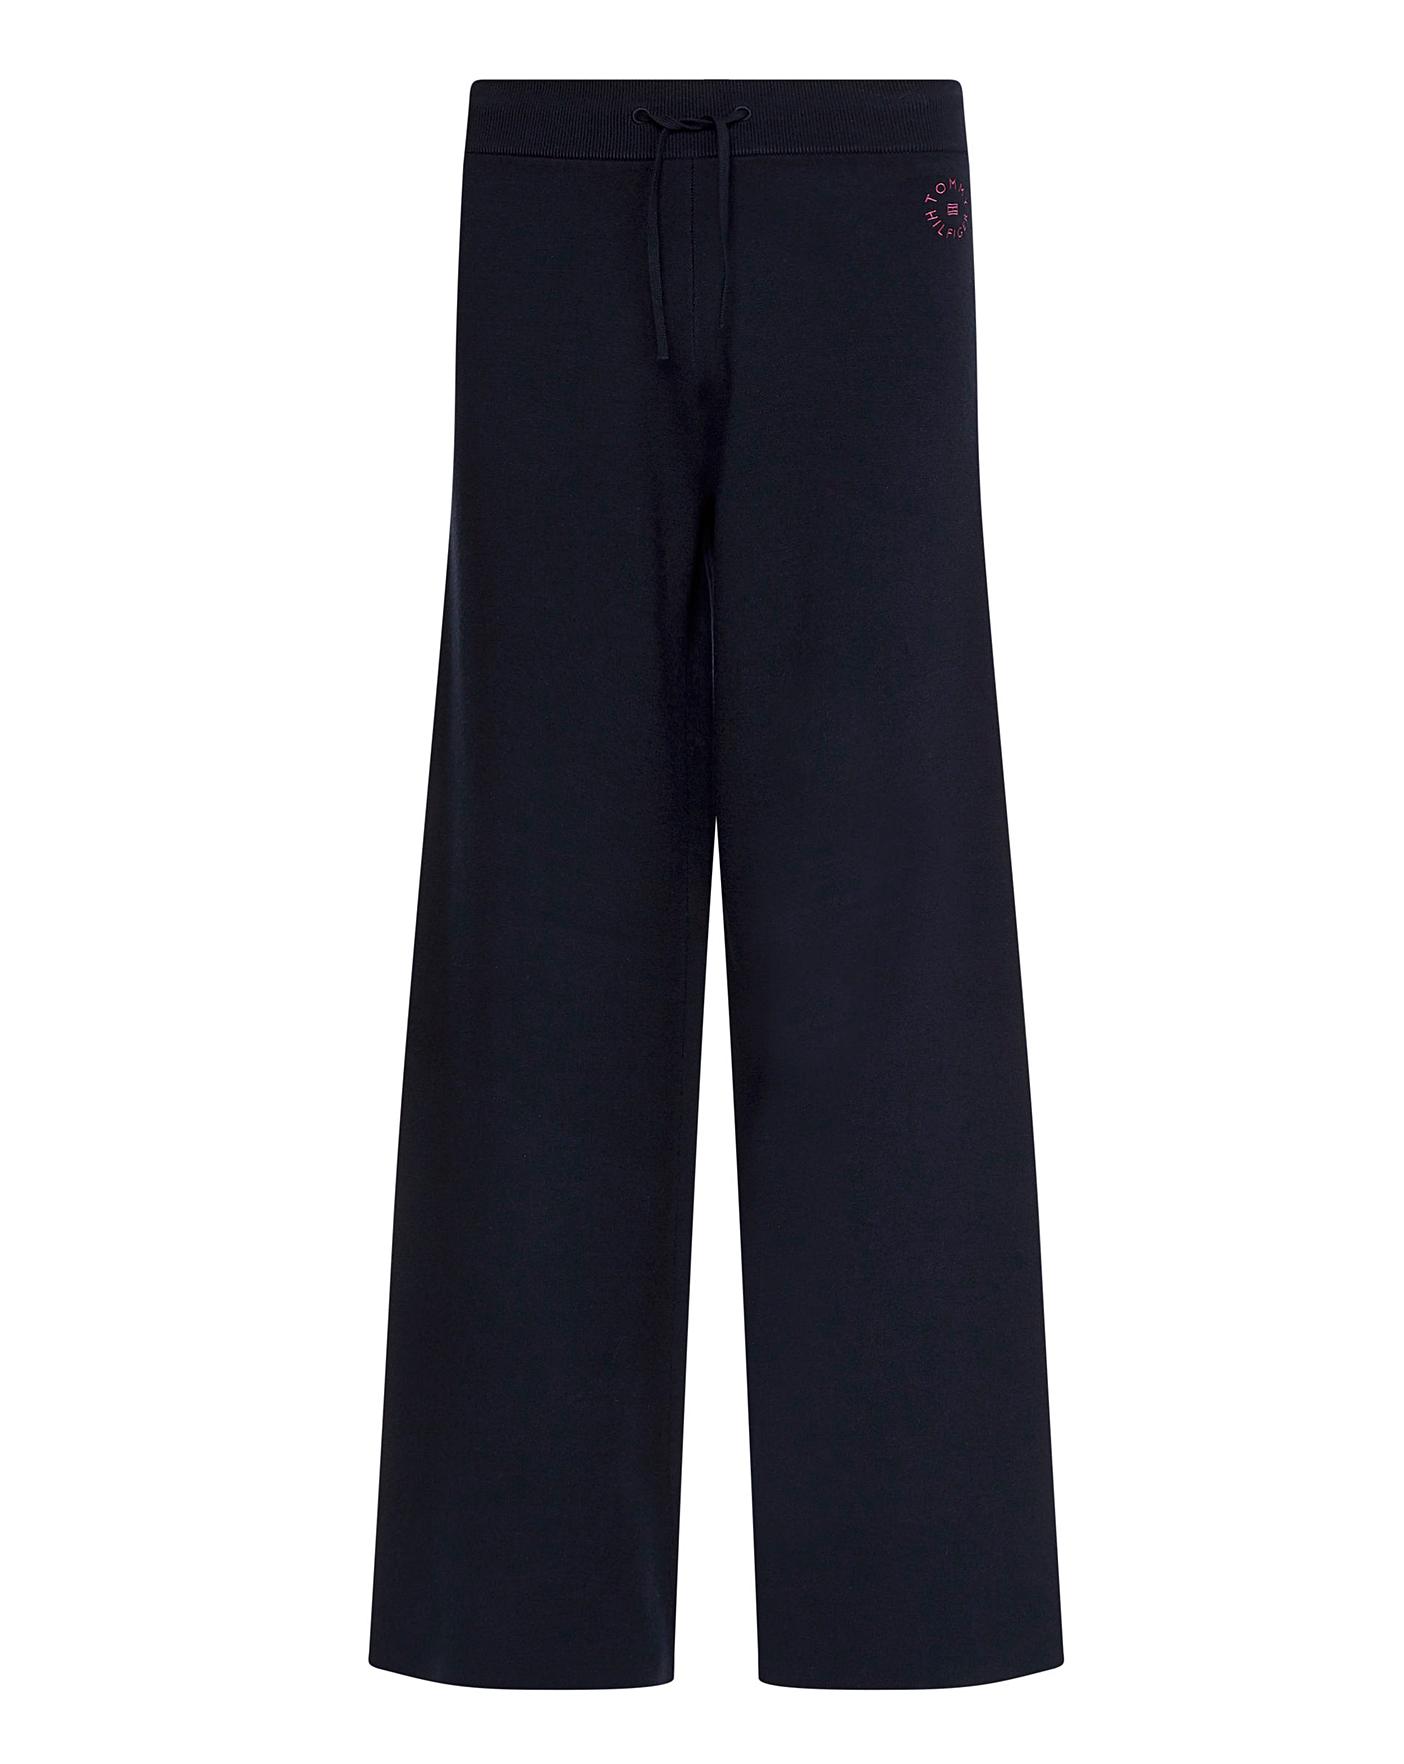 Tommy Hilfiger Performance Sweatpants - Comfortable Joggers for Women